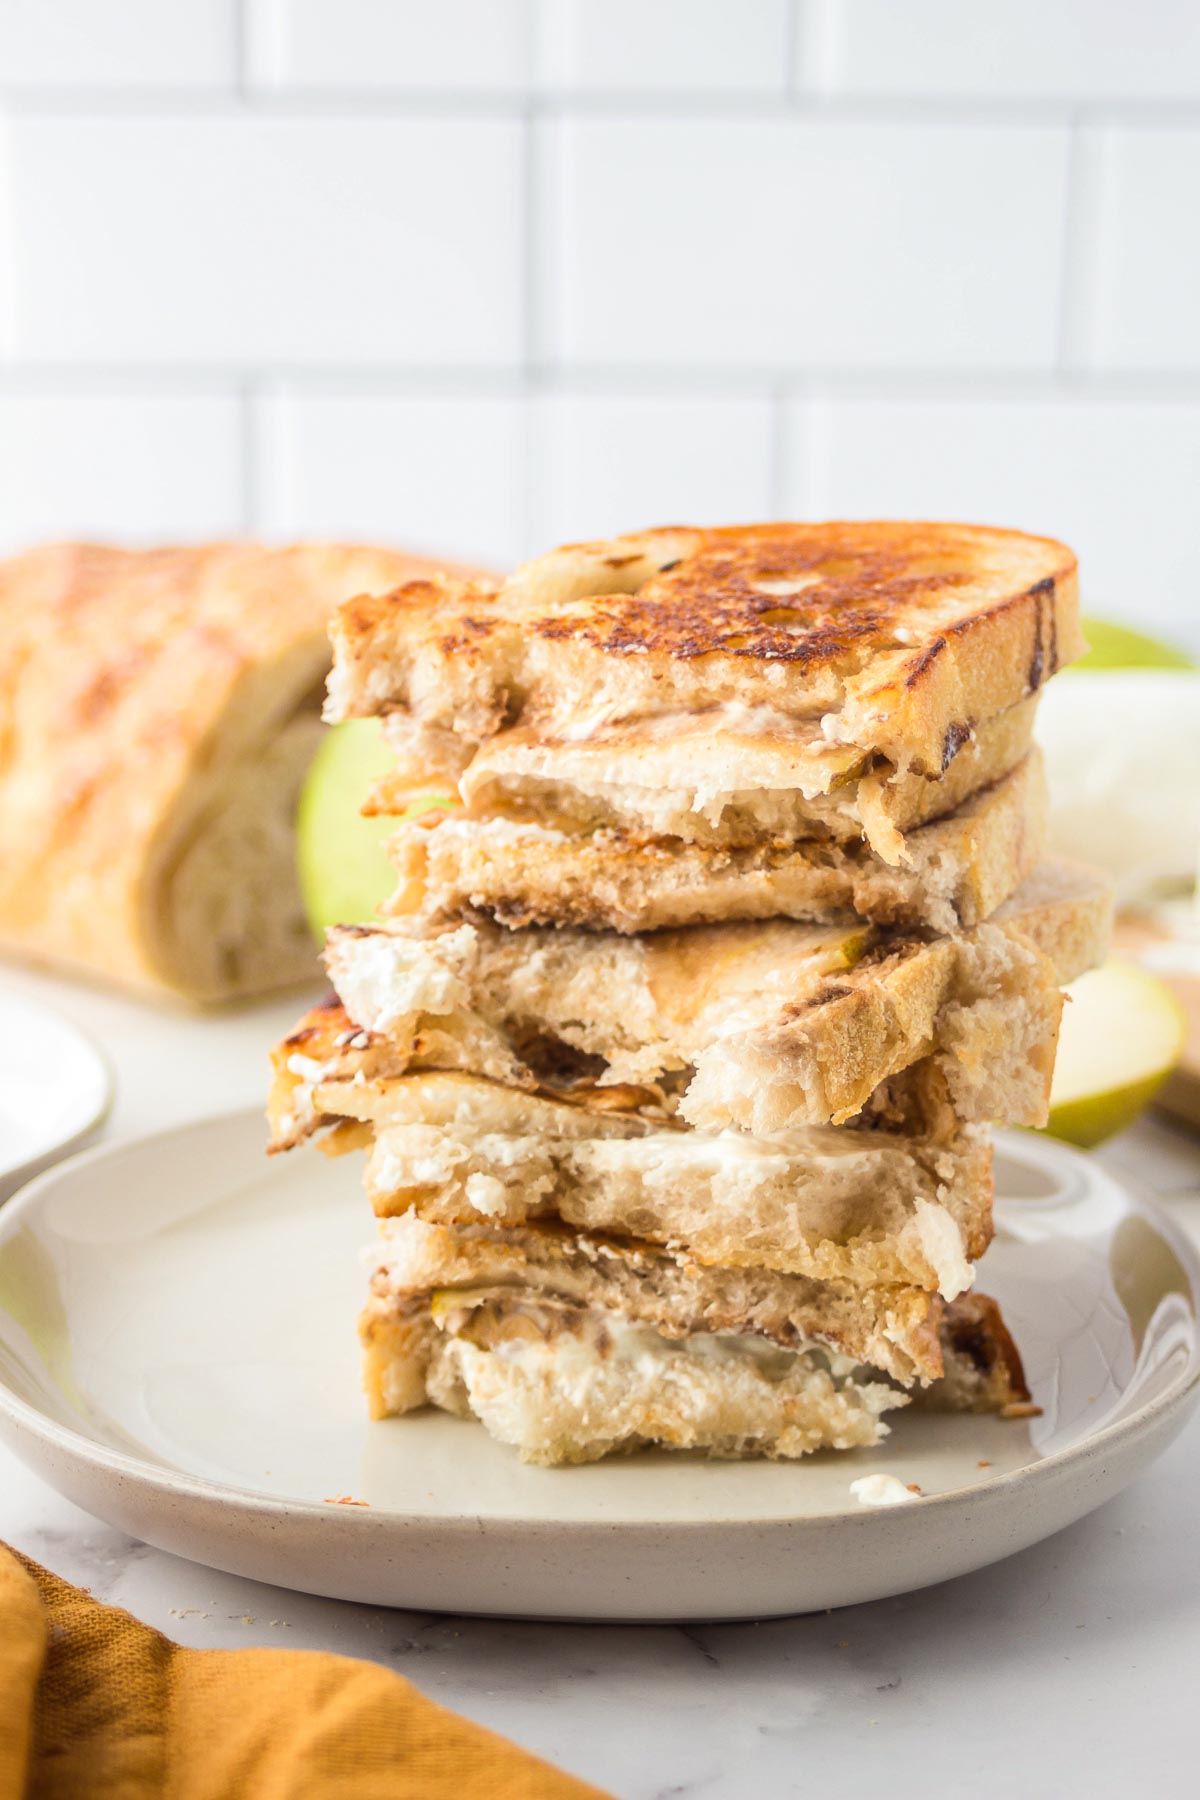 Stacked goat cheese and pear grilled cheese sandwich on a plate.